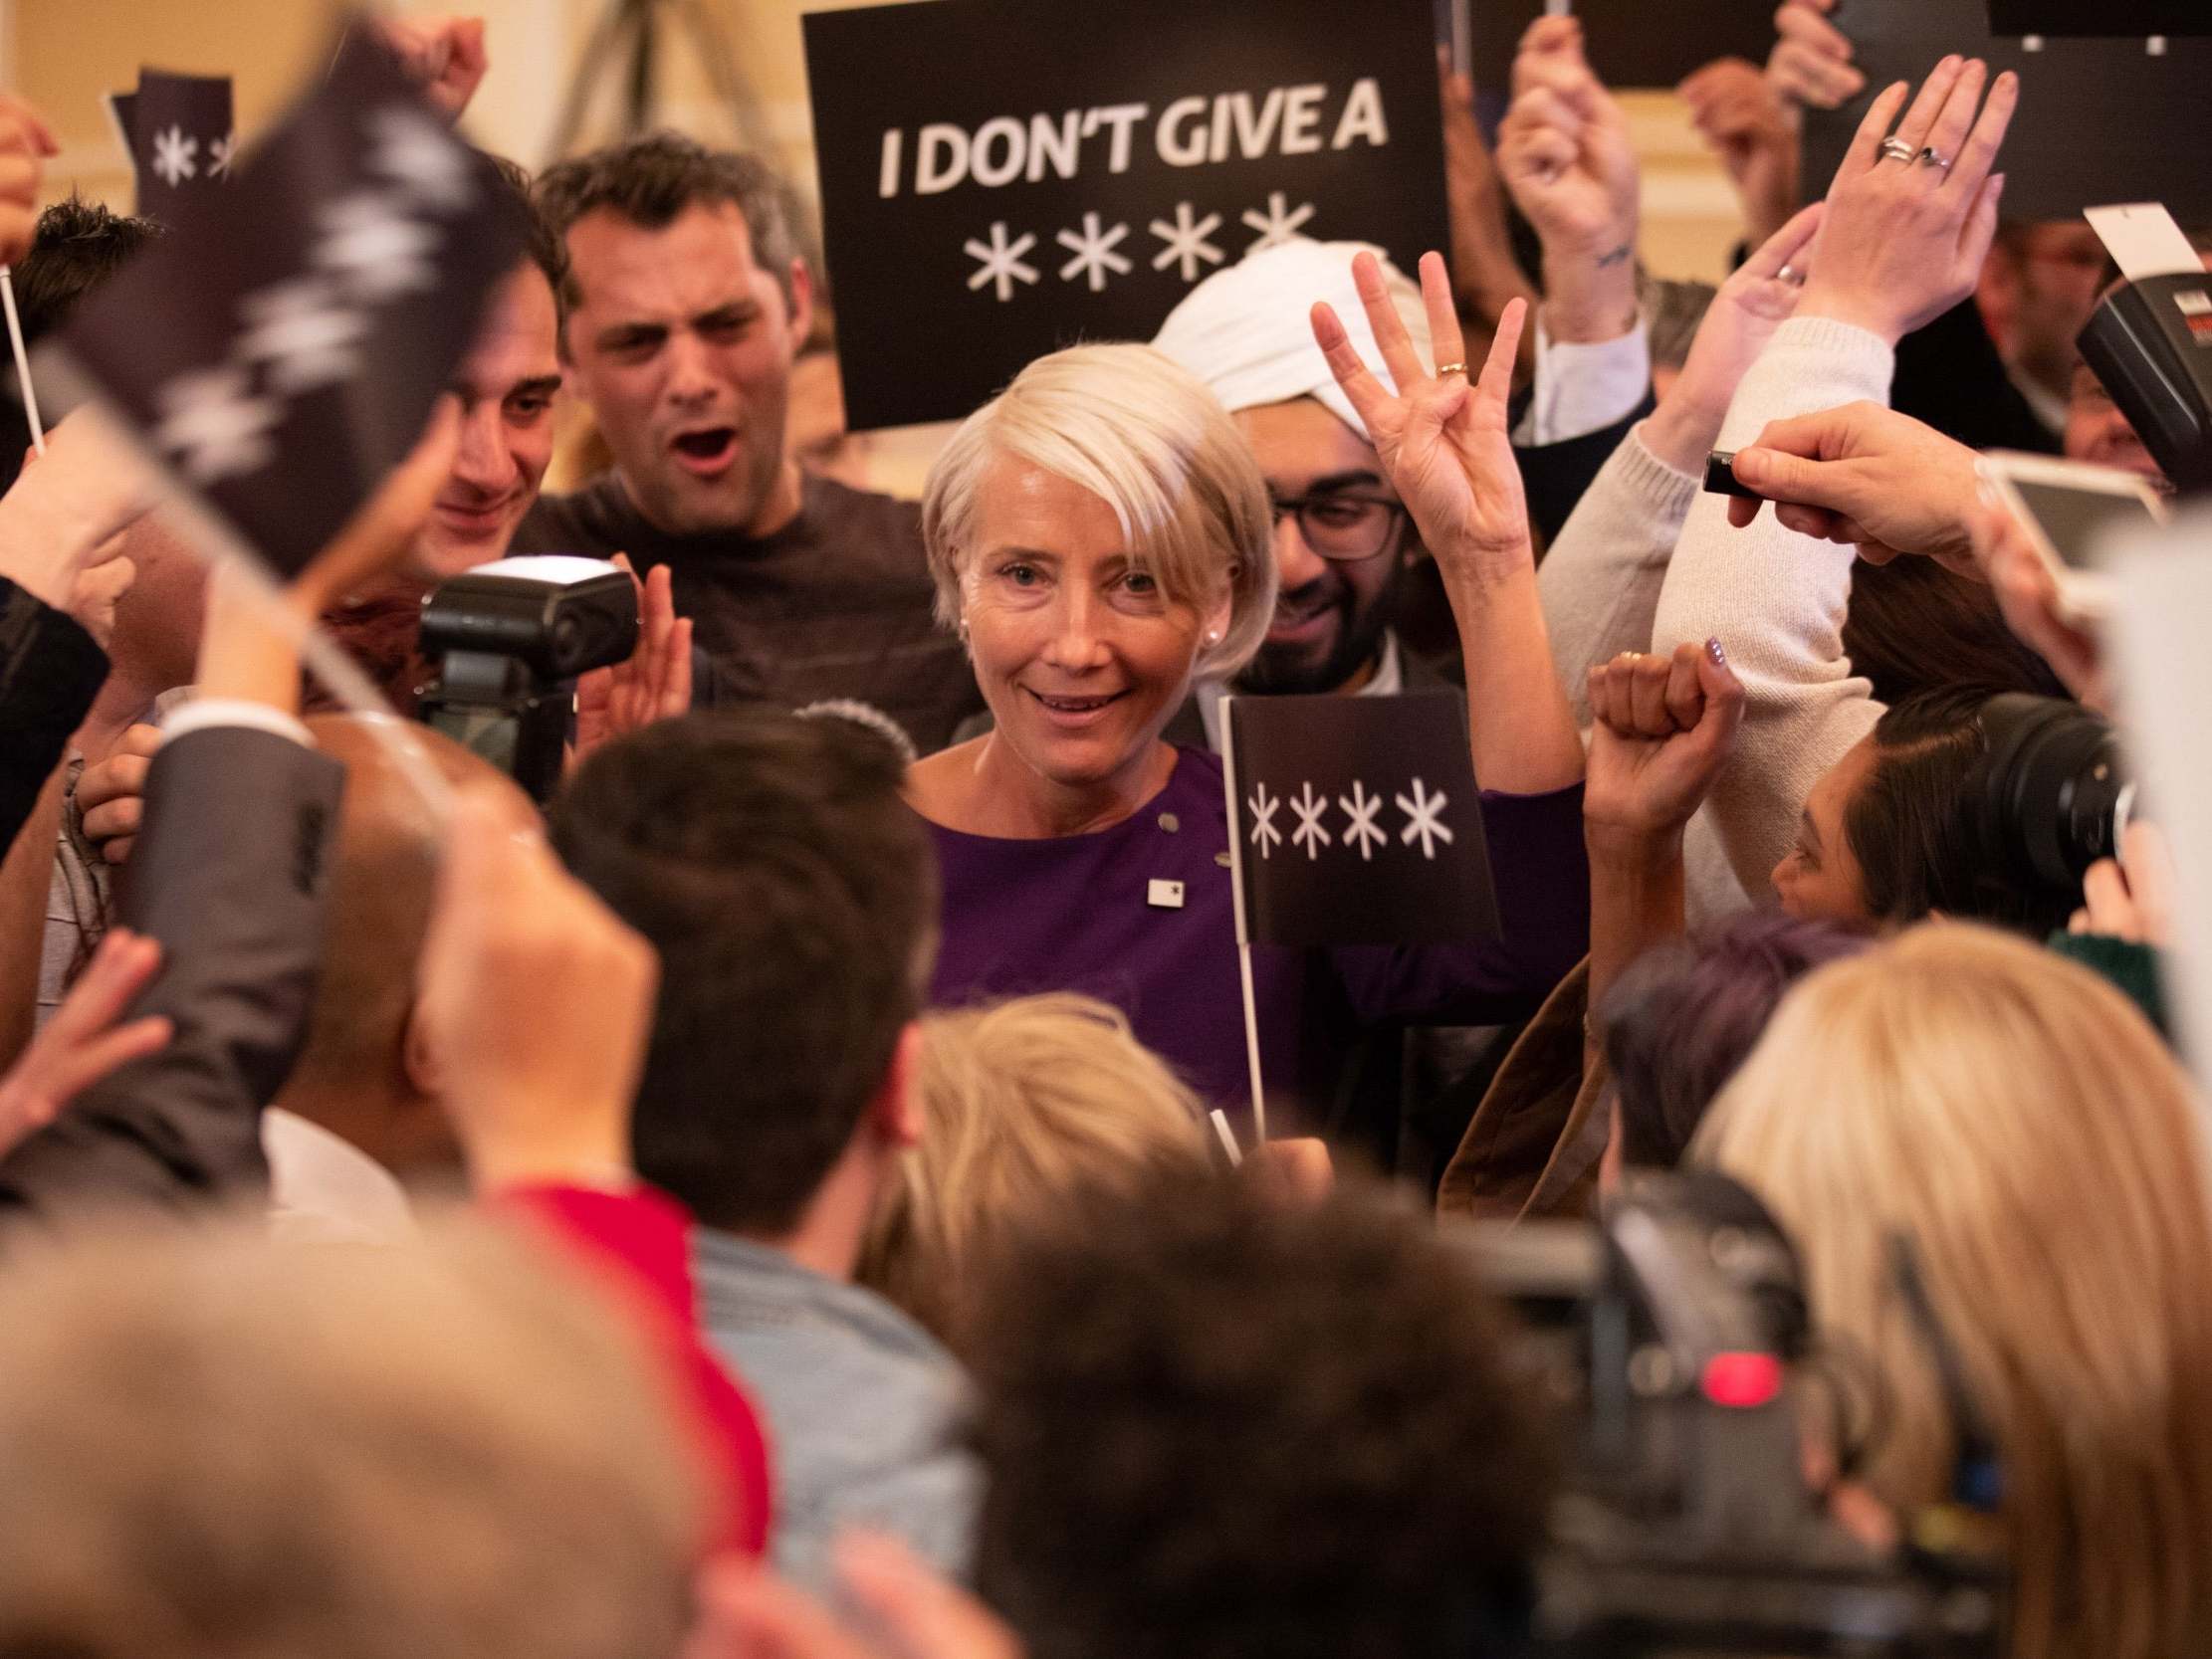 Emma Thompson as Viv Rook: rarely has such paper-thin cynicism been projected so insidiously